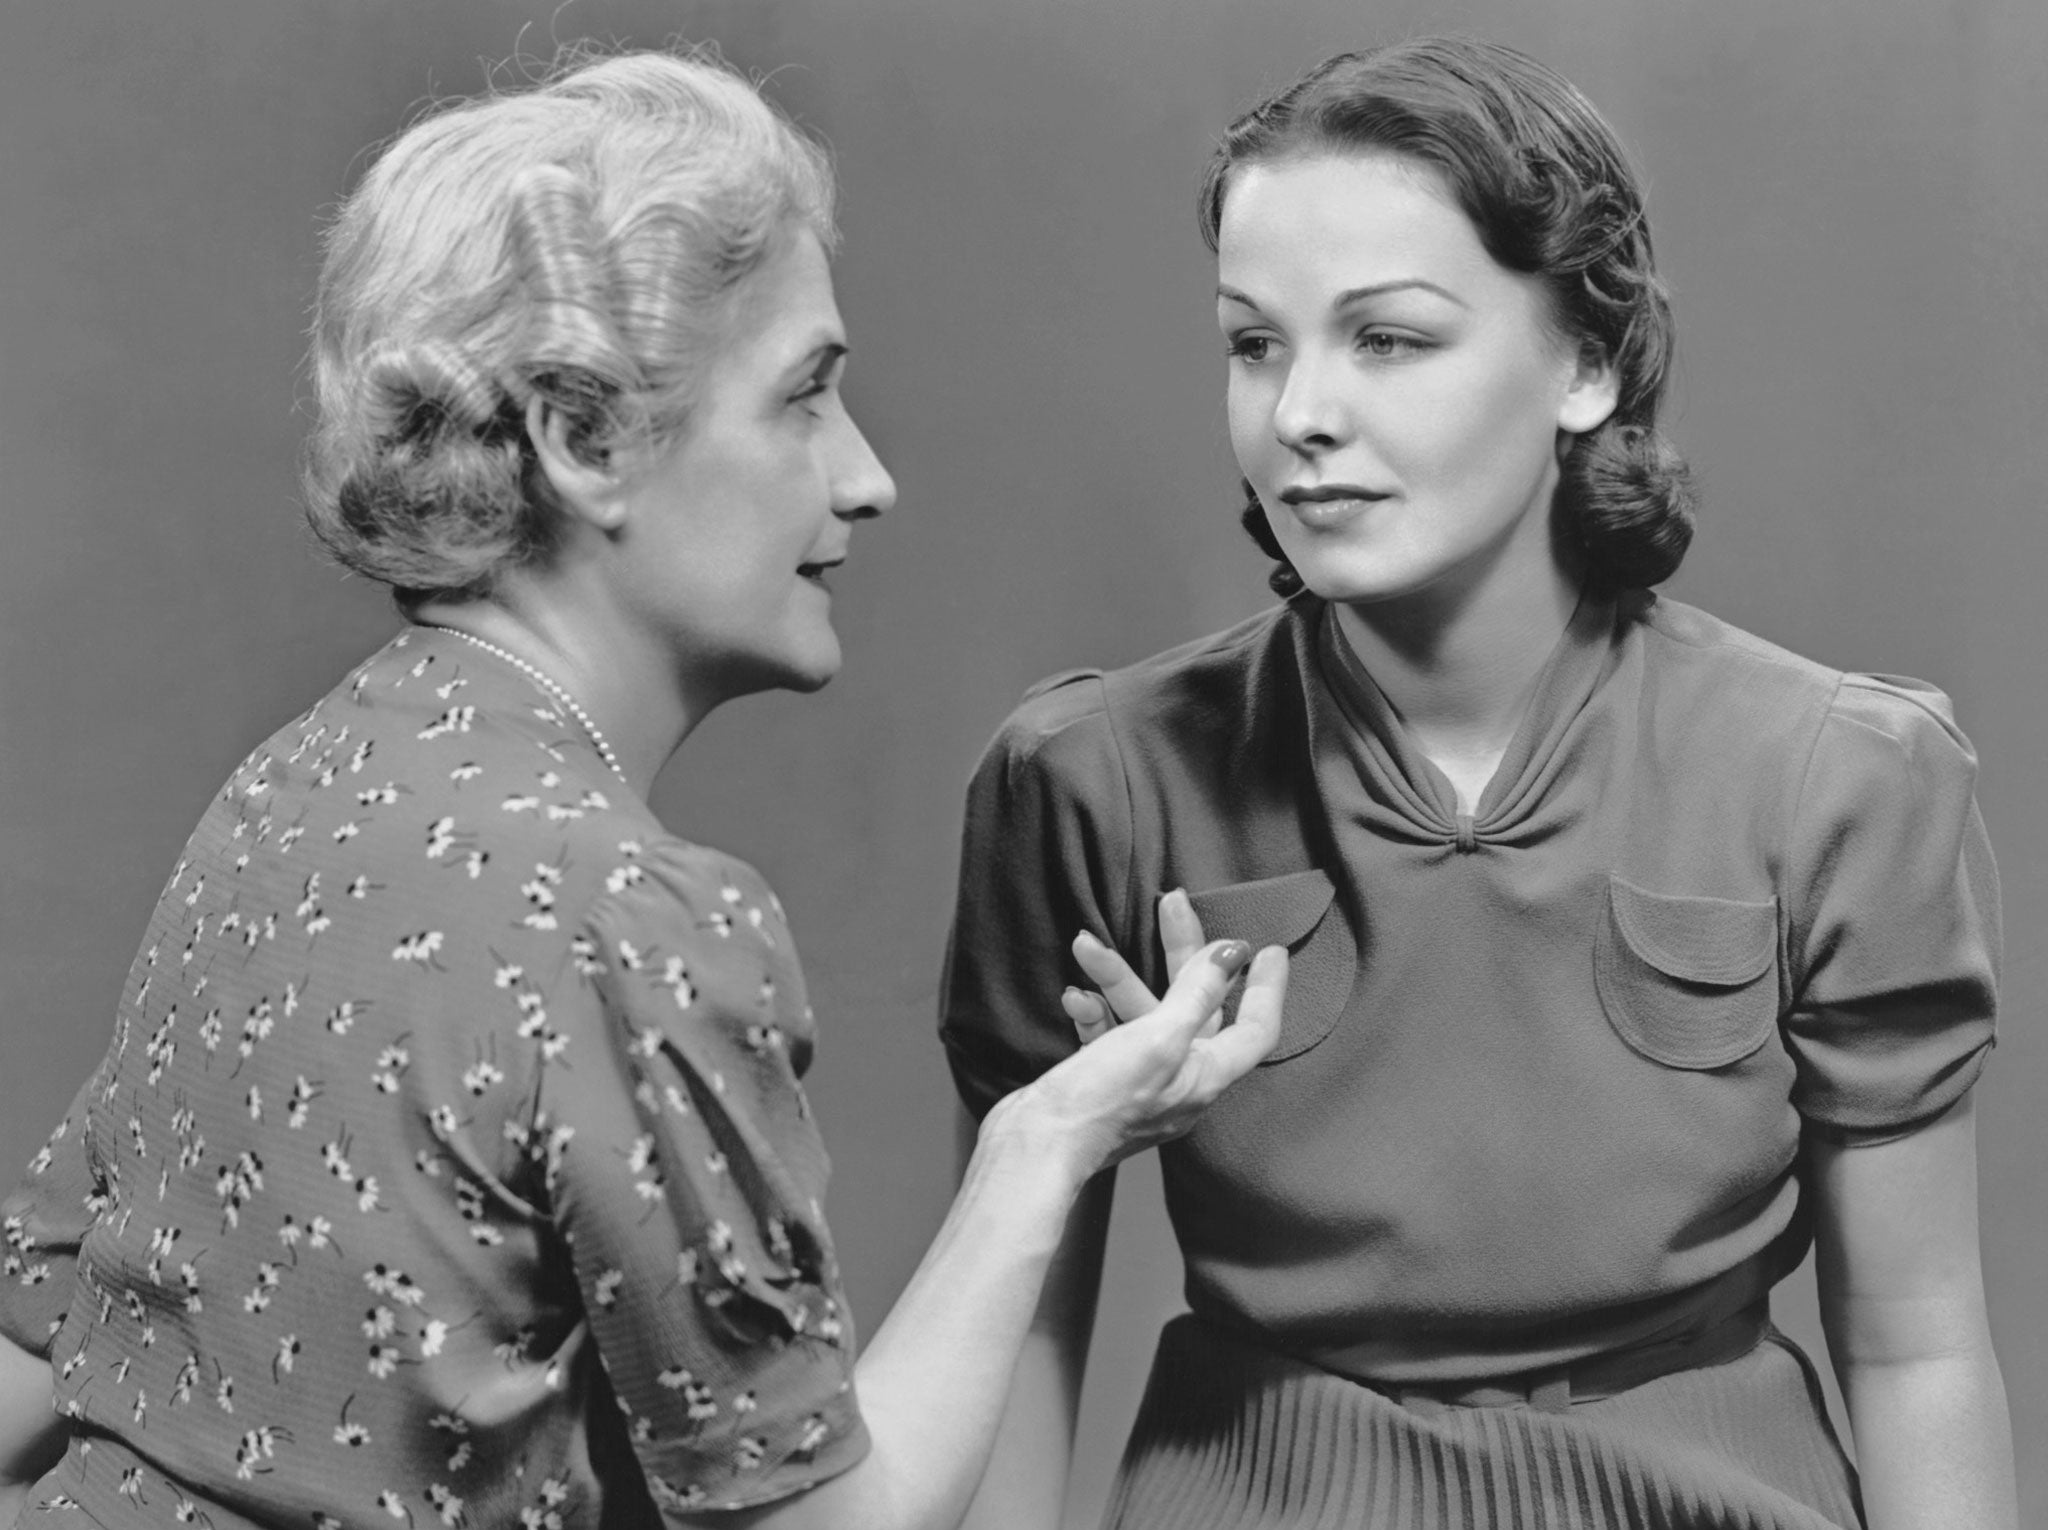 UNITED STATES - CIRCA 1950s: Mother talking with adult daughter.